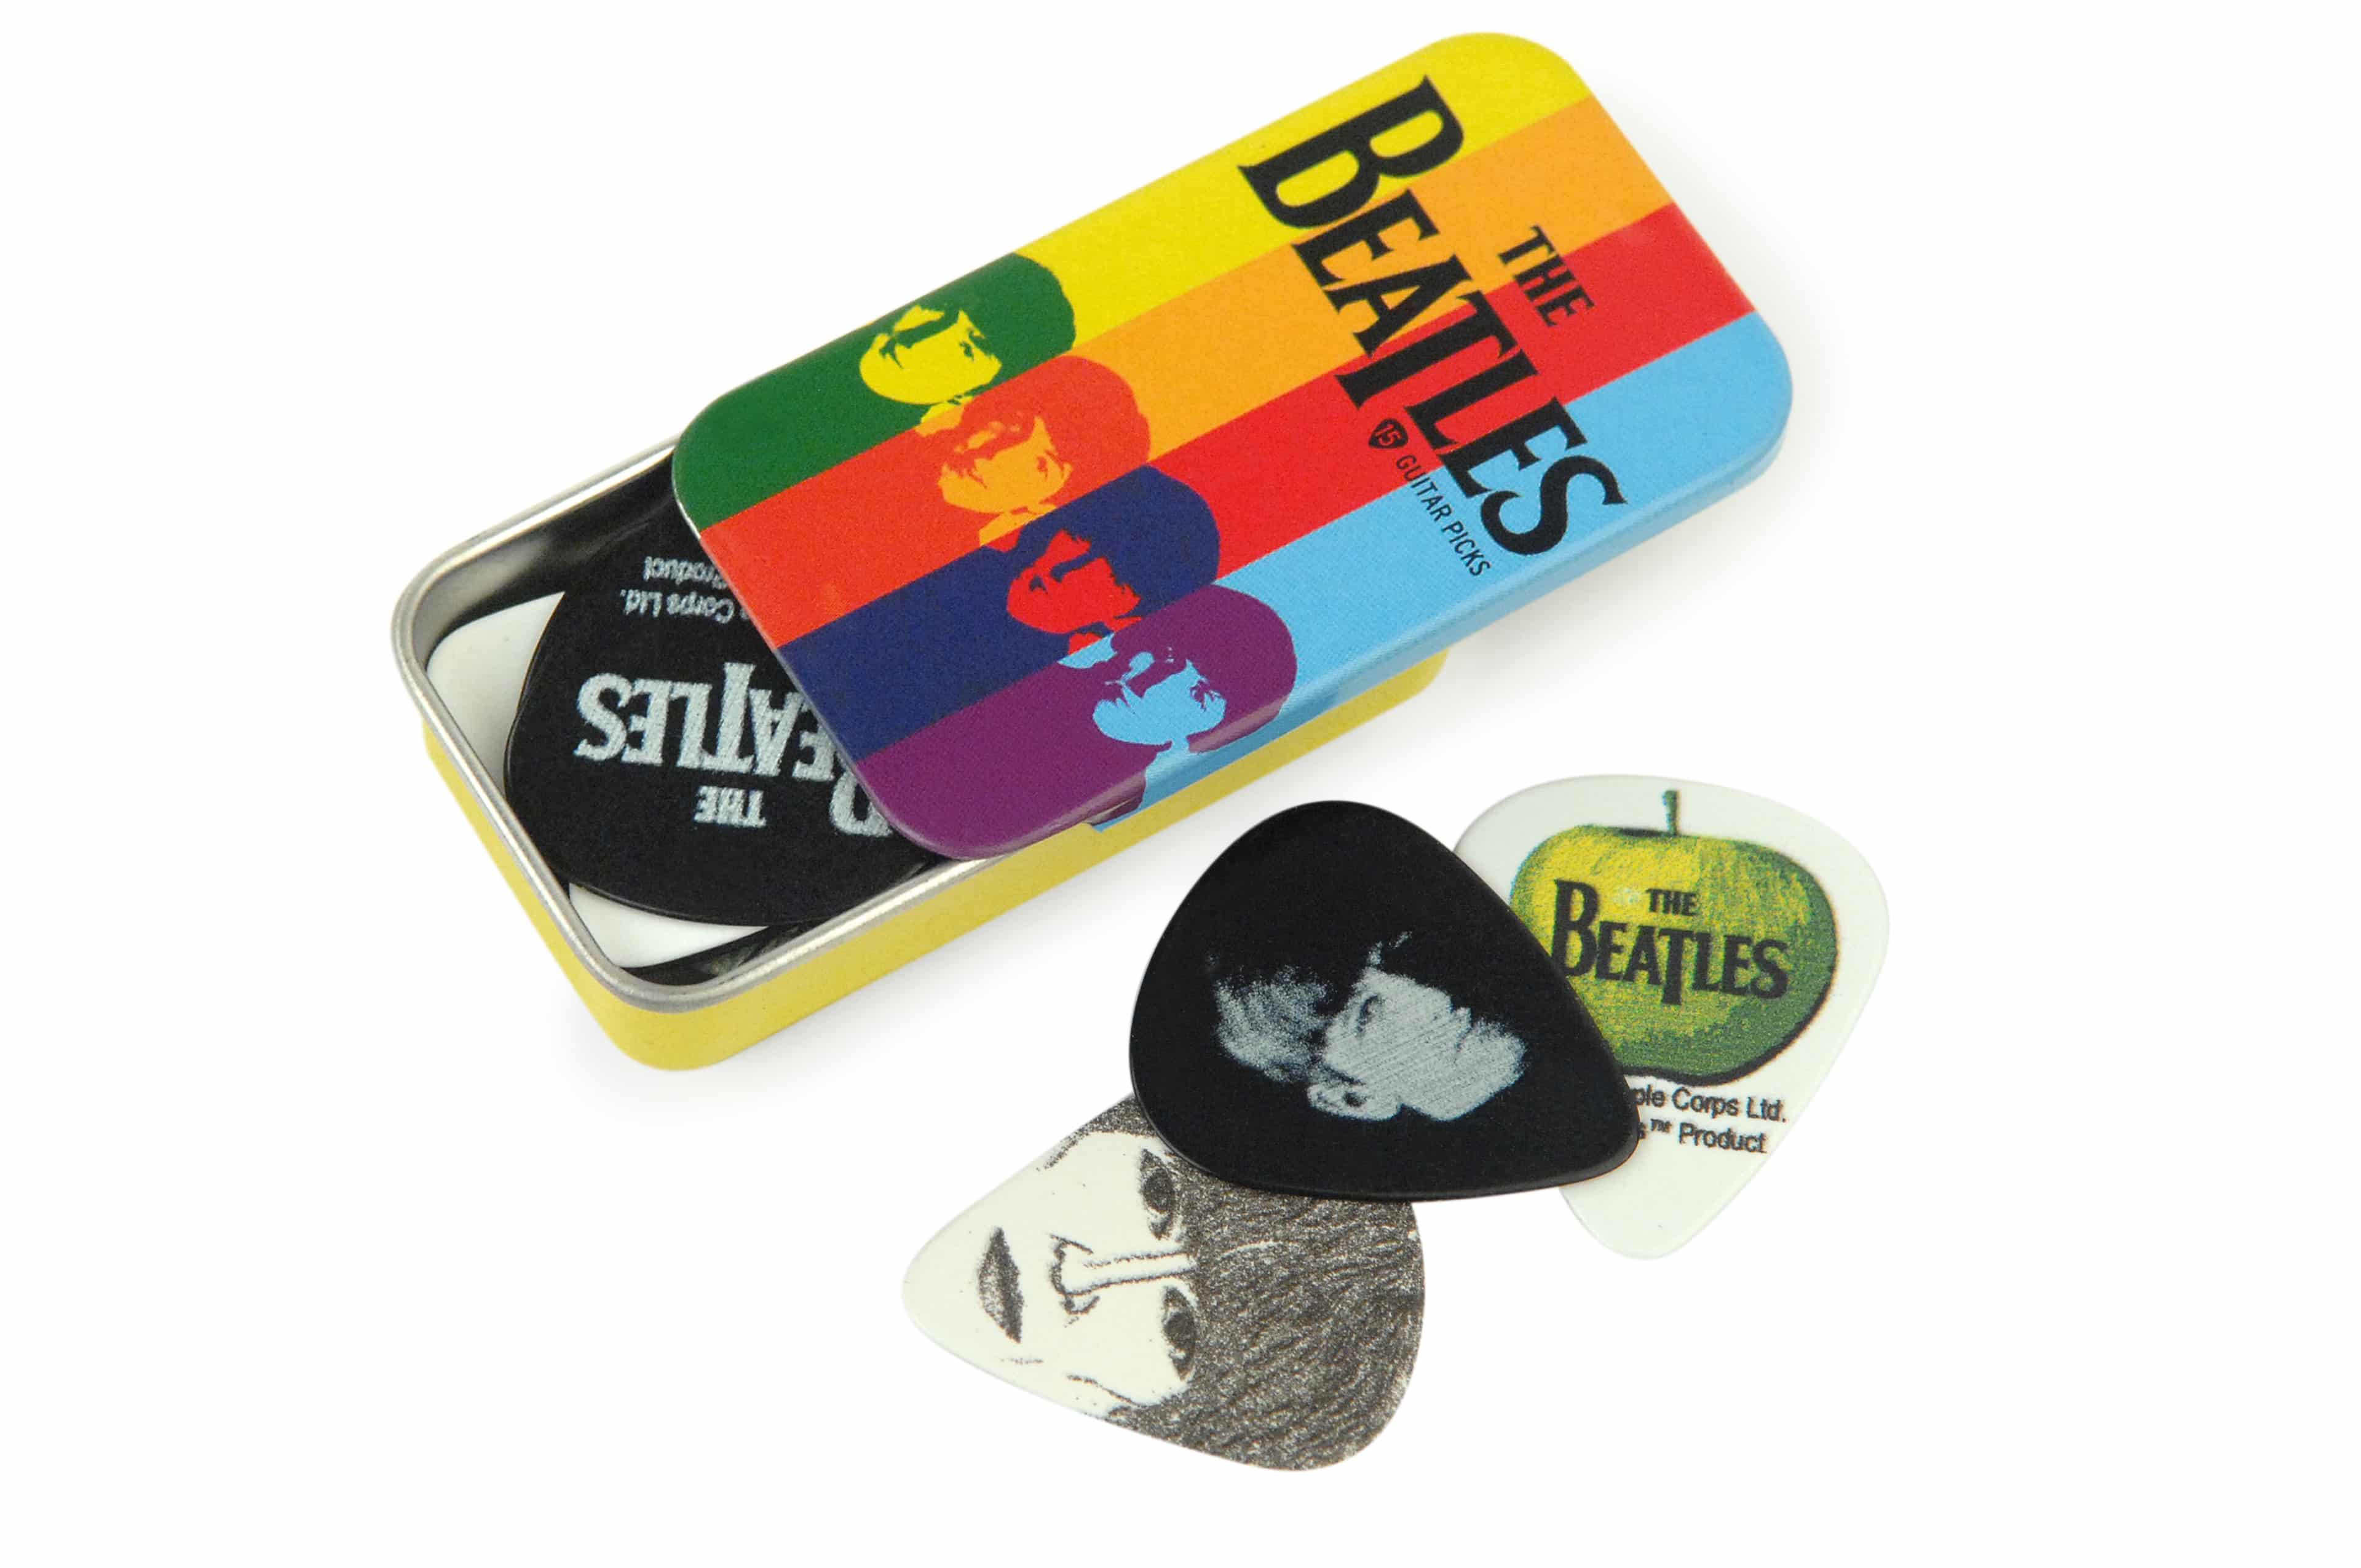 D’ADDARIO ACCESSORIES BRINGS BACK BEATLES STRAPS AND PICKS